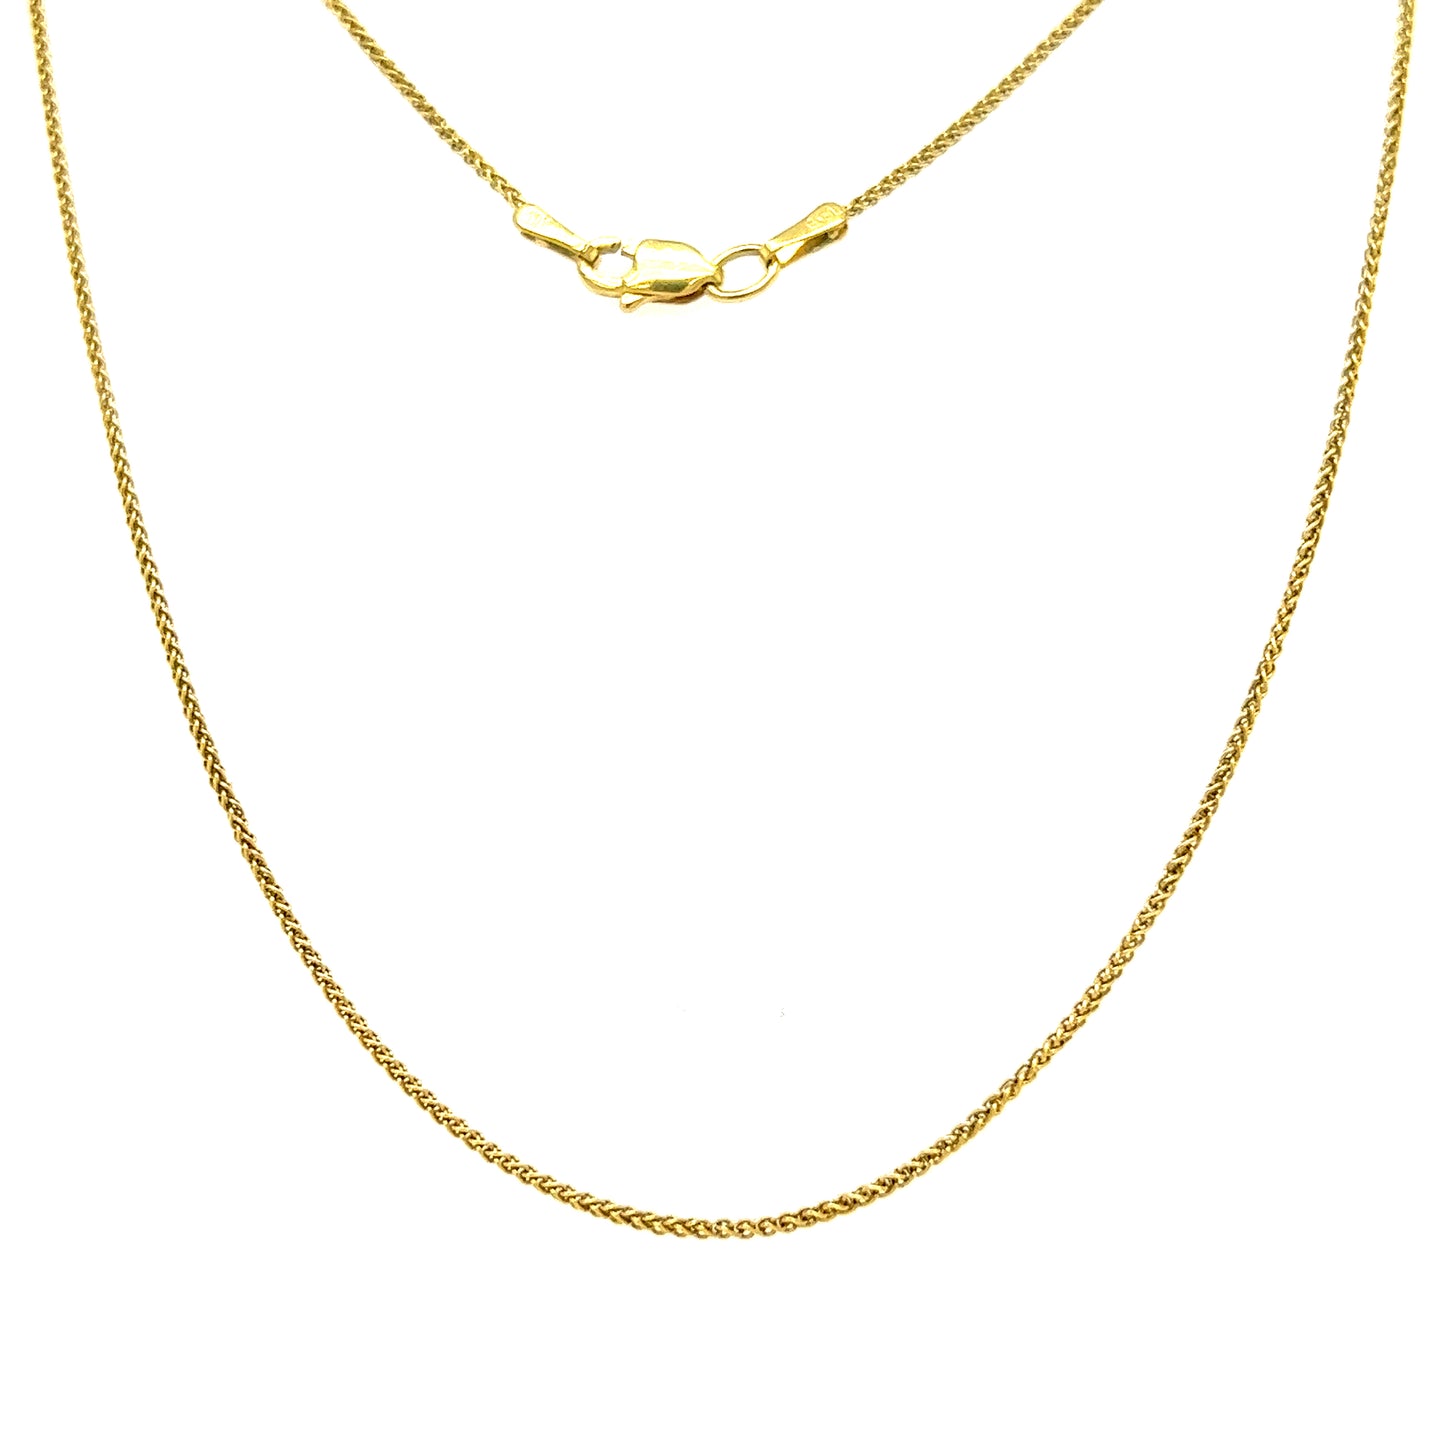 Wheat Chain with 16in Length in 10K Yellow Gold Full Chain View